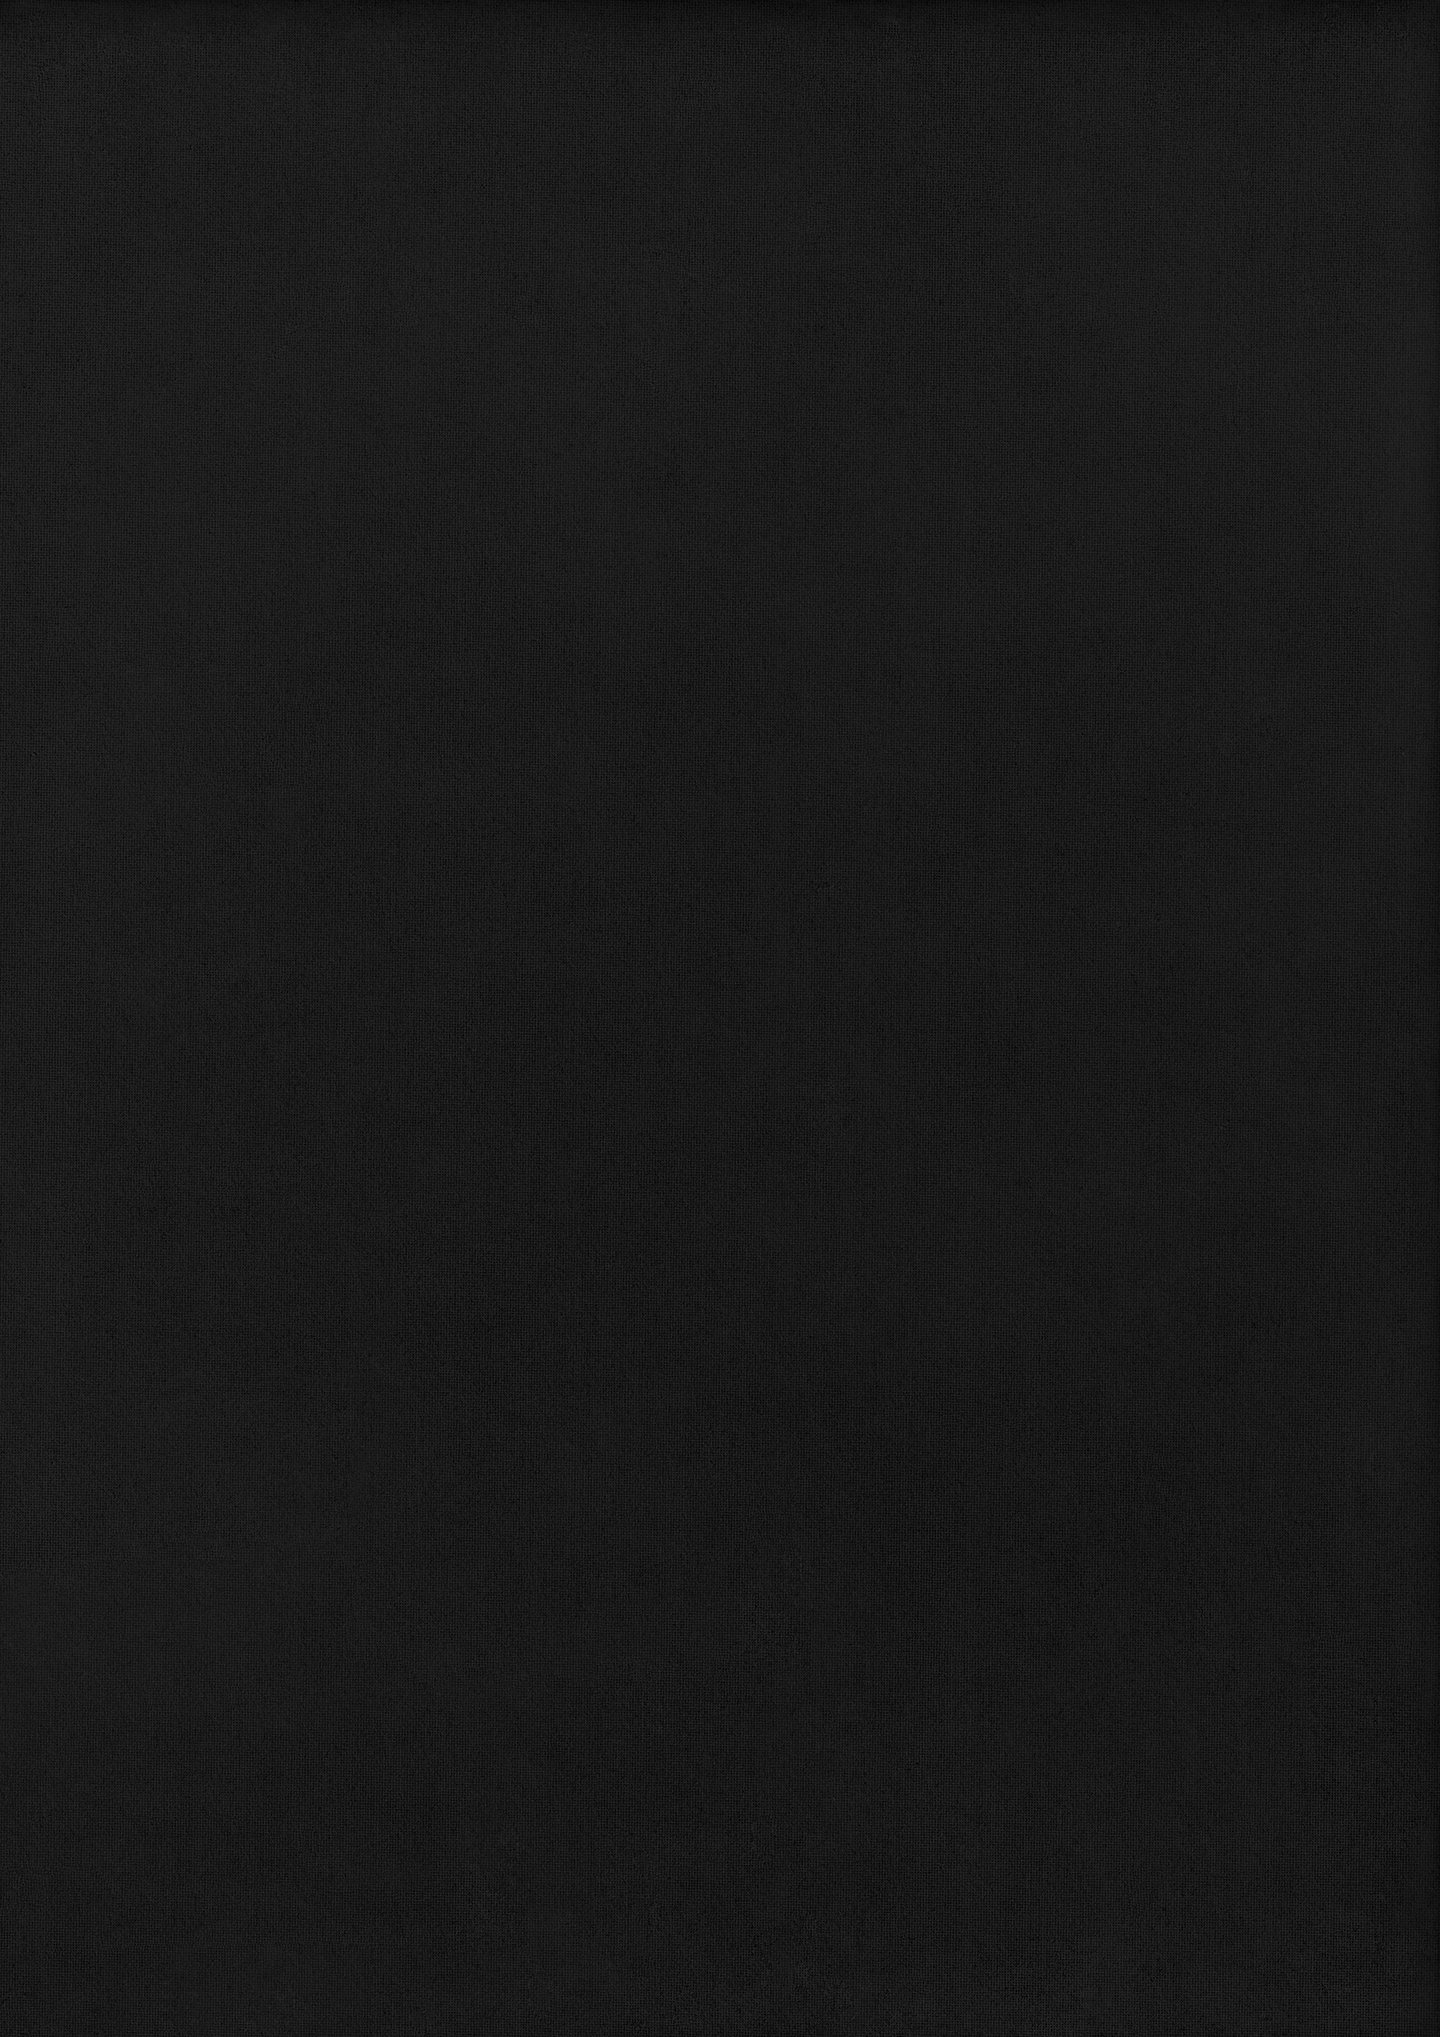 08 black paper different texture types a4 fabric 293